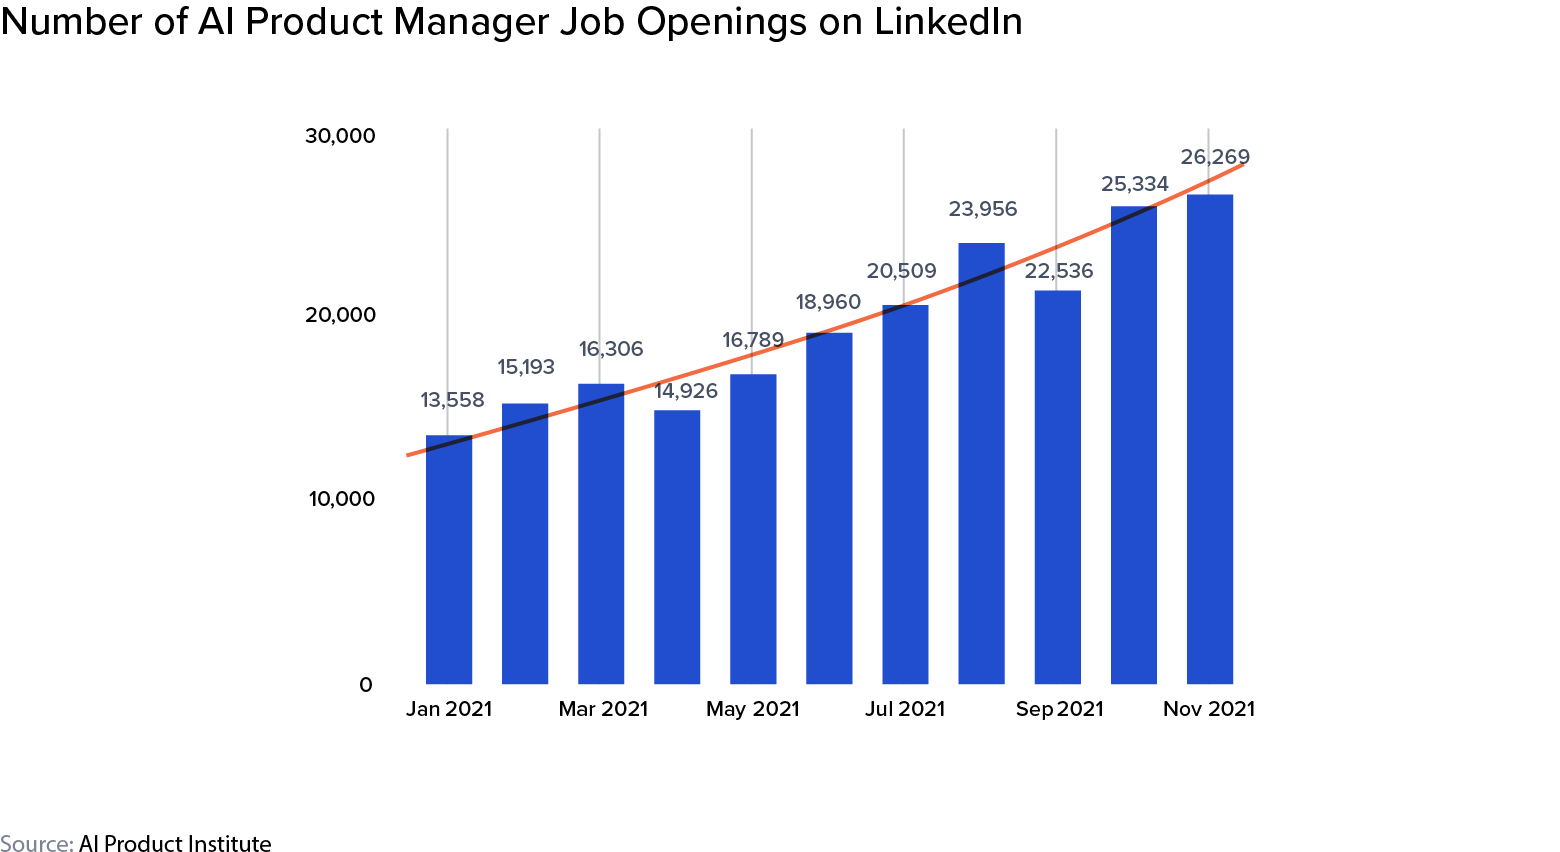 Number of AI Product Manager Job Openings on LinkedIn